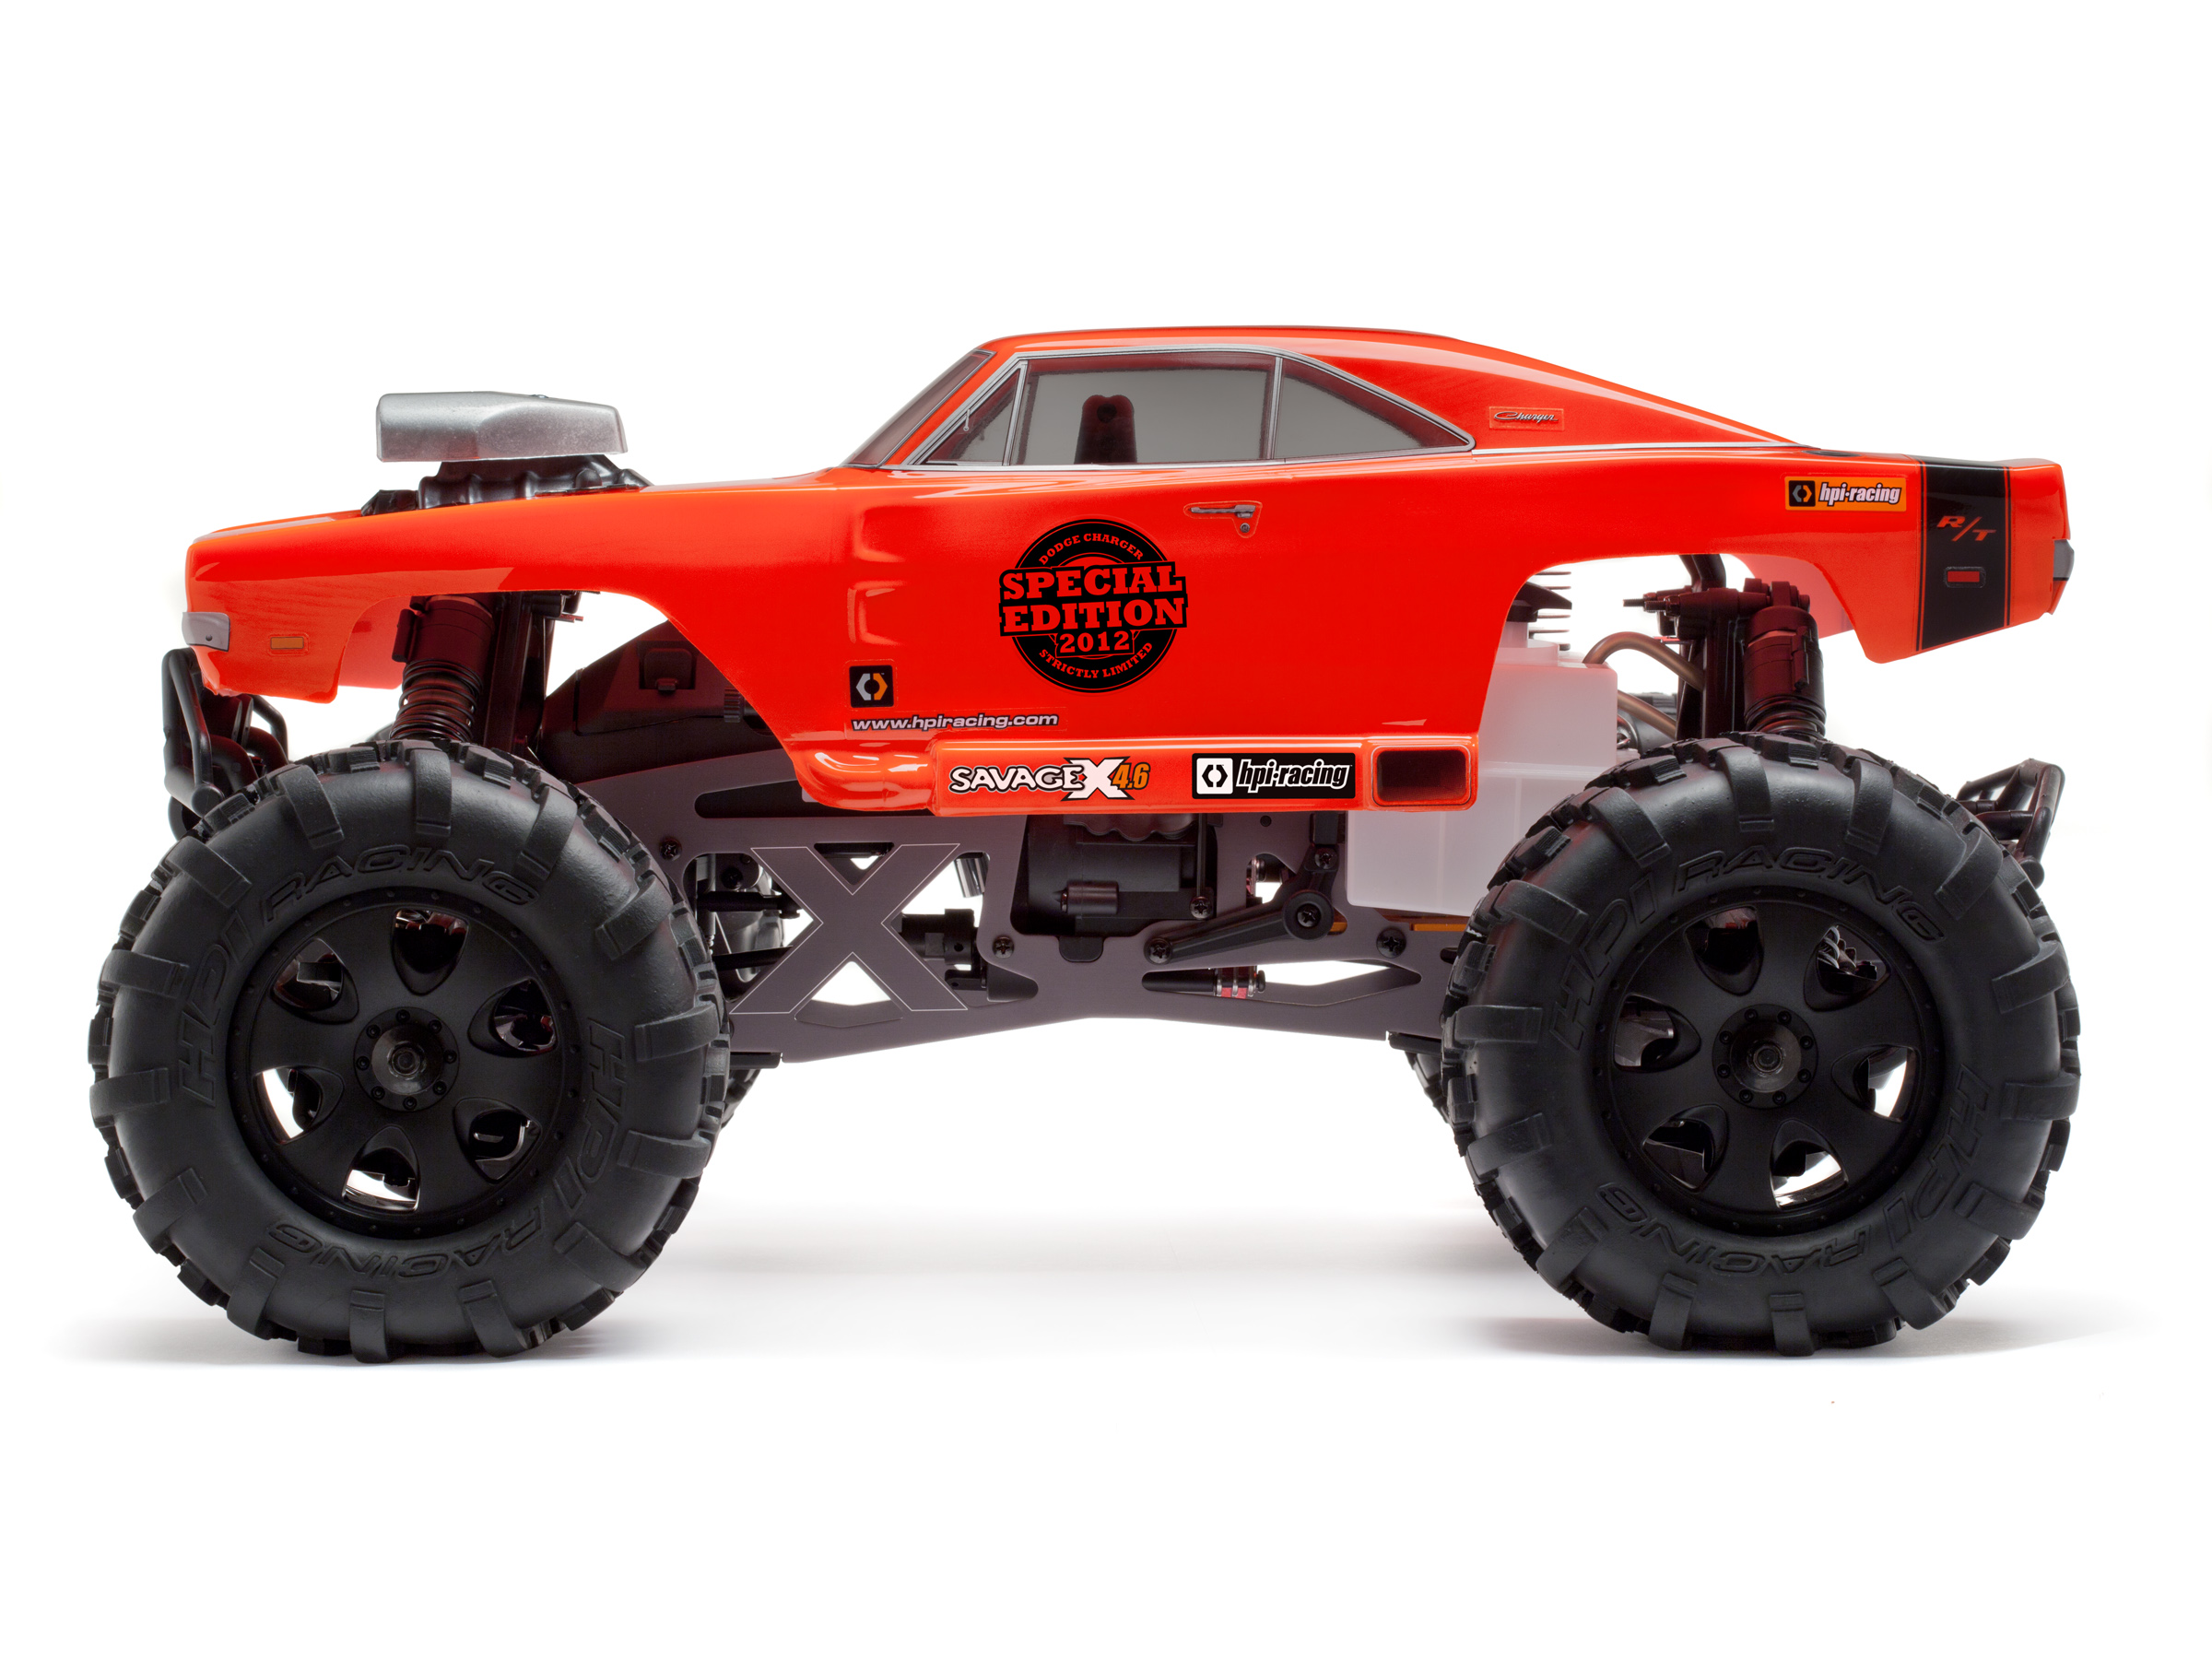 HPI Savage X 4.6 Special Edition Release | RC Soup